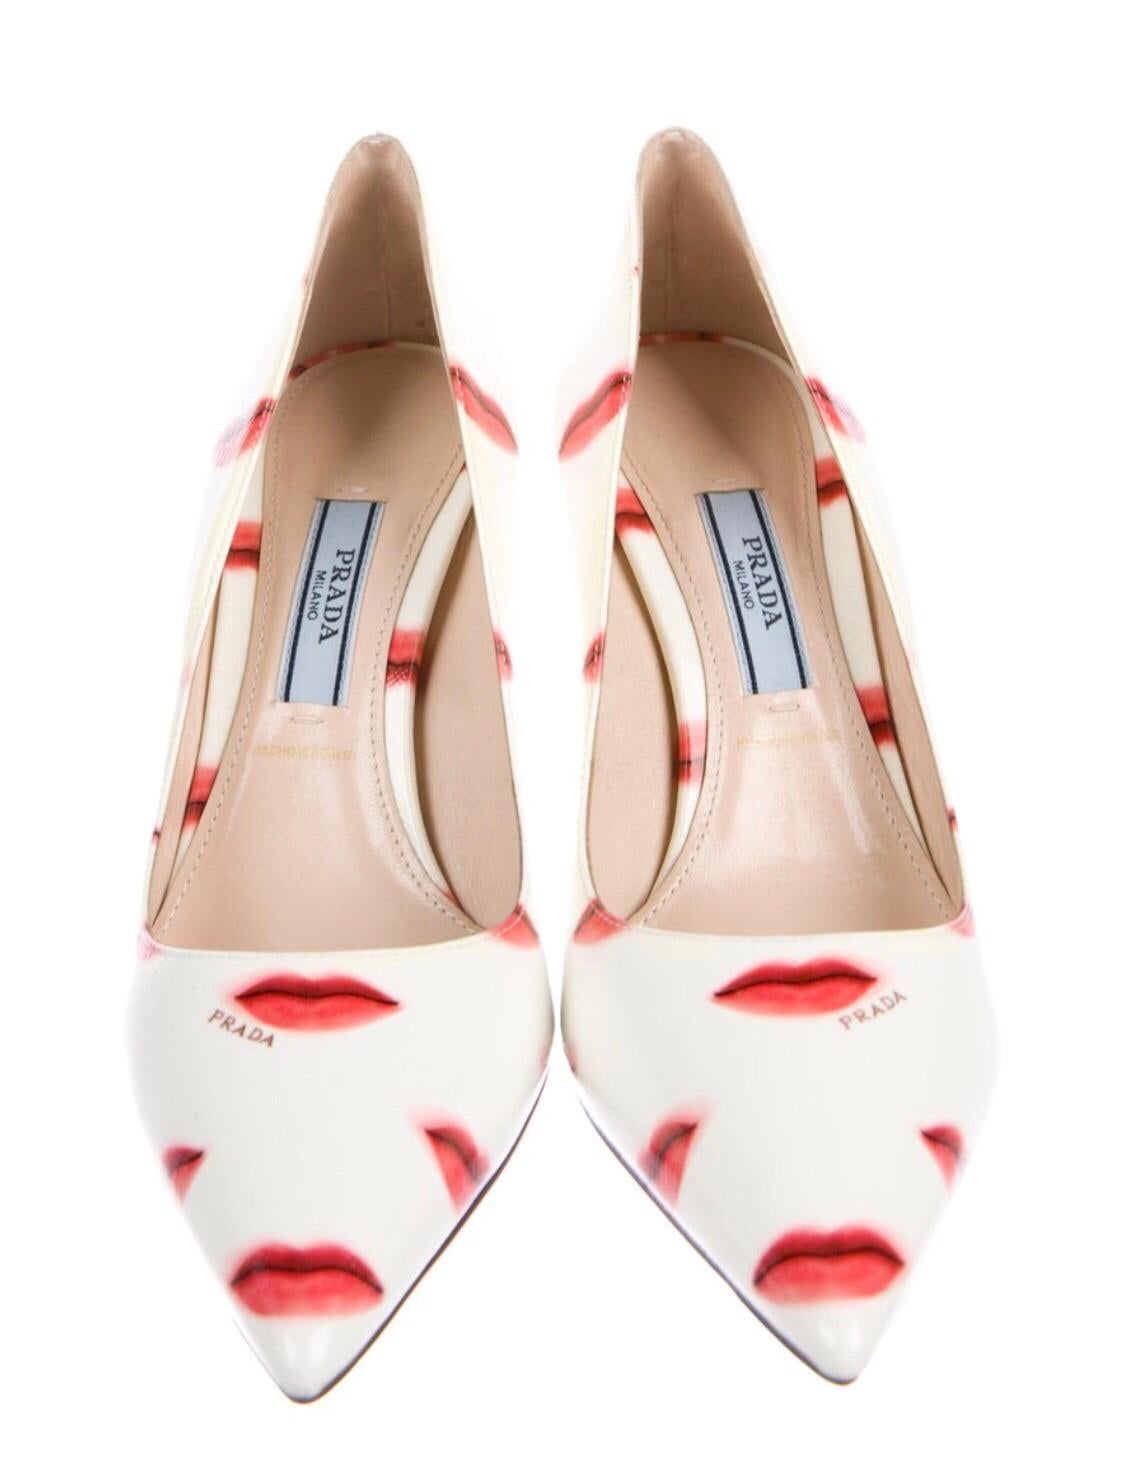 Prada Saffiano Leather Red Ivory Lip Point Toe Pumps Heels Shoes 1